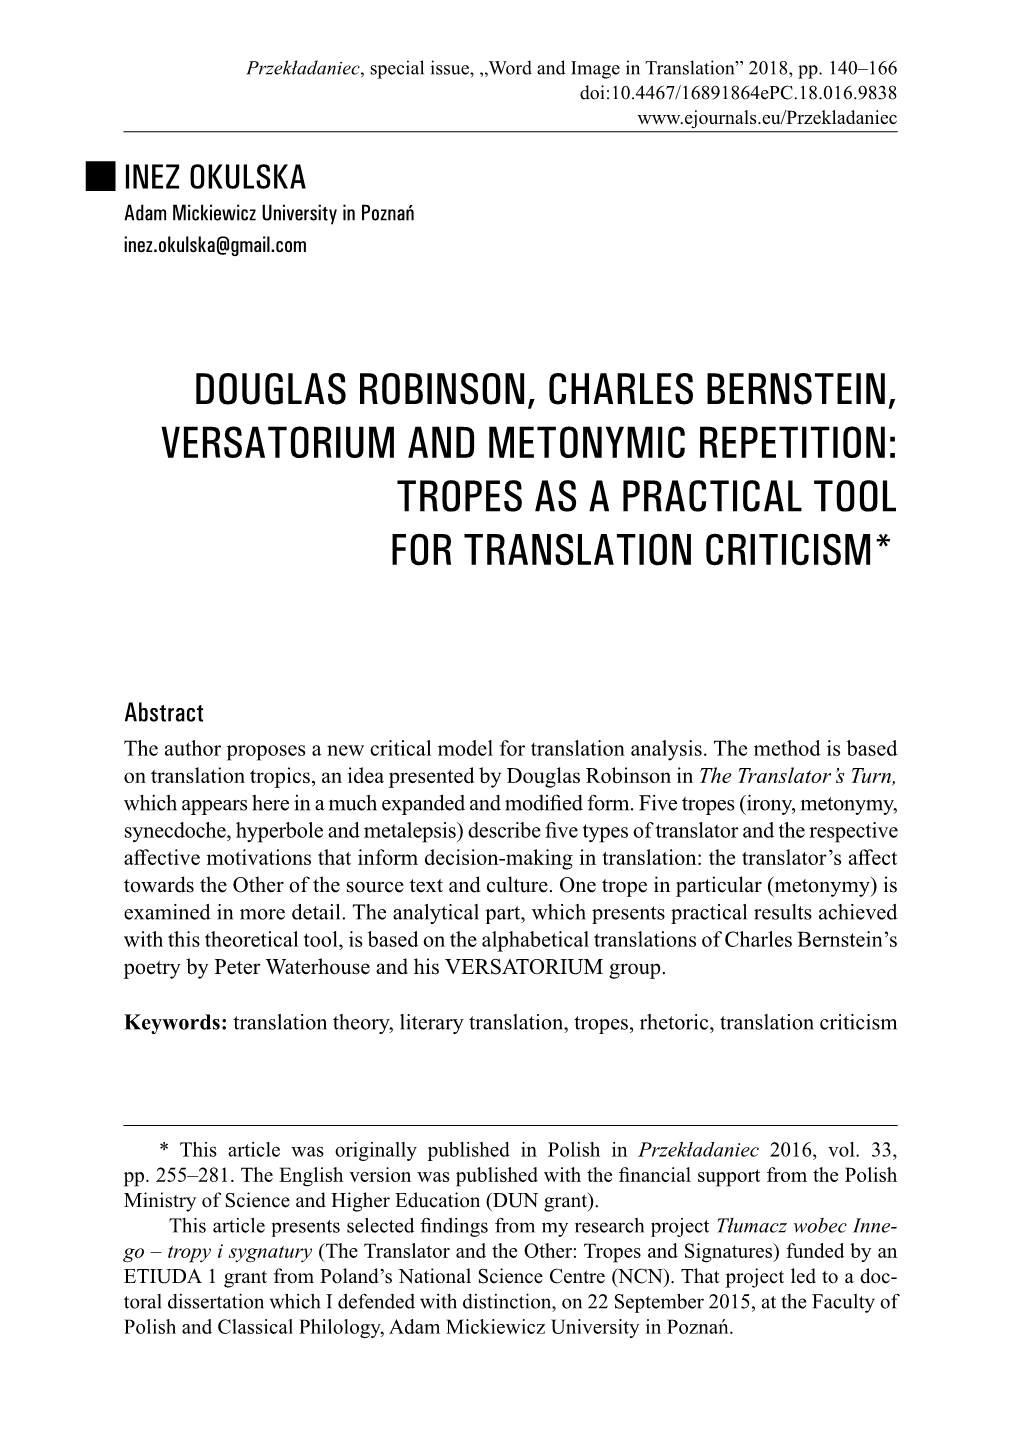 Douglas Robinson, Charles Bernstein, Versatorium and Metonymic Repetition: Tropes As a Practical Tool for Translation Criticism*1